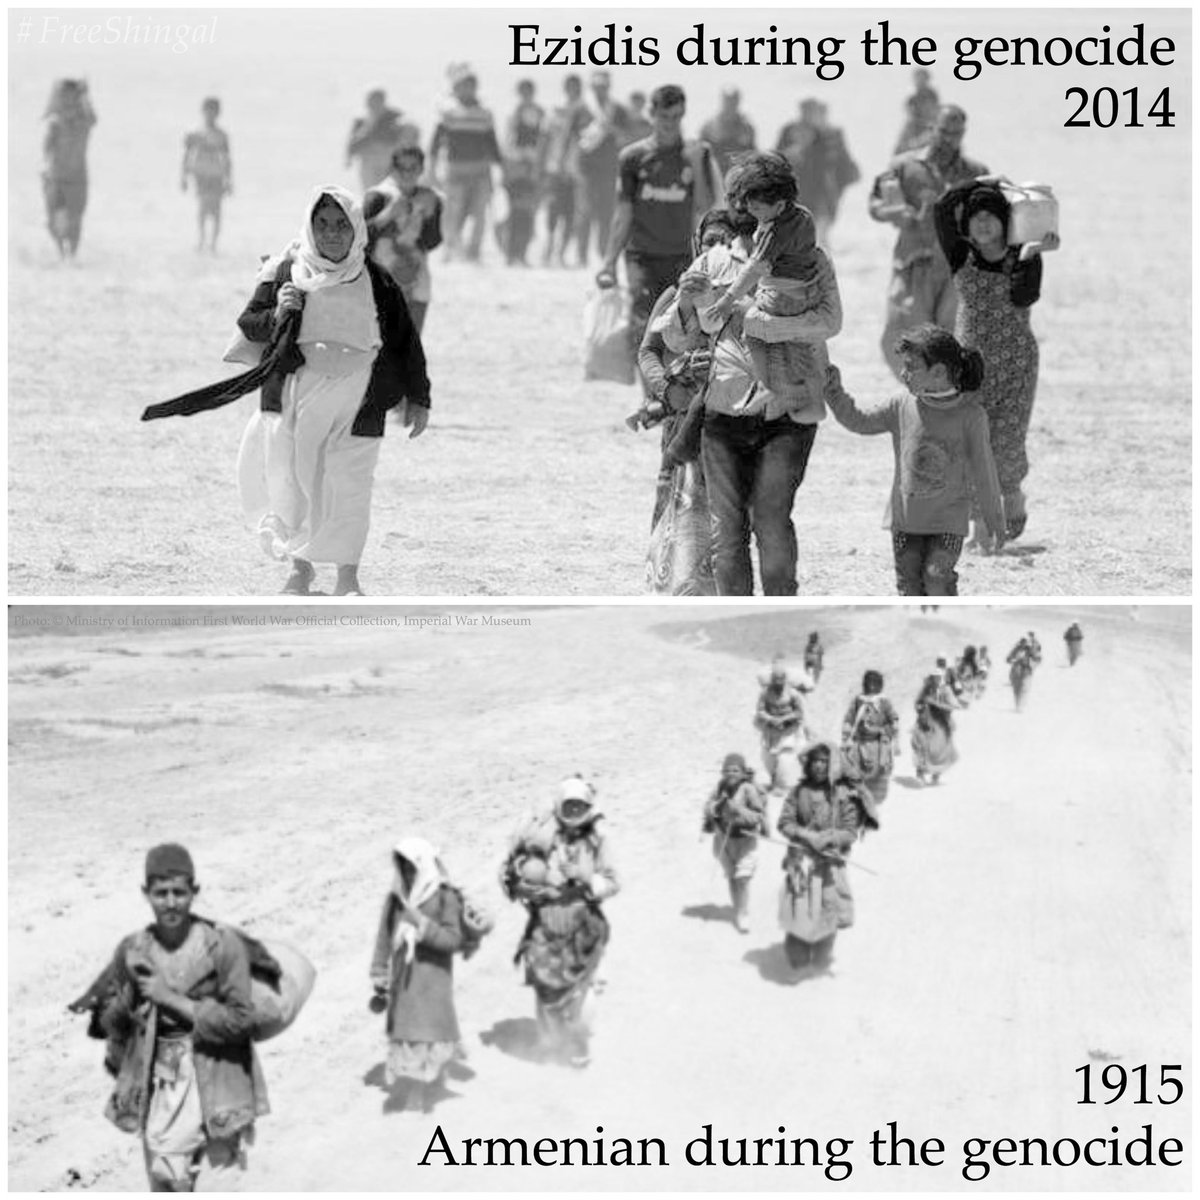 Two genocides, same footprints 

Picture 1: Ezidis during the Genocide in 2014, Sinjar
Picture 2: Armenians during the Genocide in 1915 (Copyright: Ministry of Information First World War Official Collection, Imperial War Museum)

#Aghet #Ferman #Armenian #Ezidi #Genocide